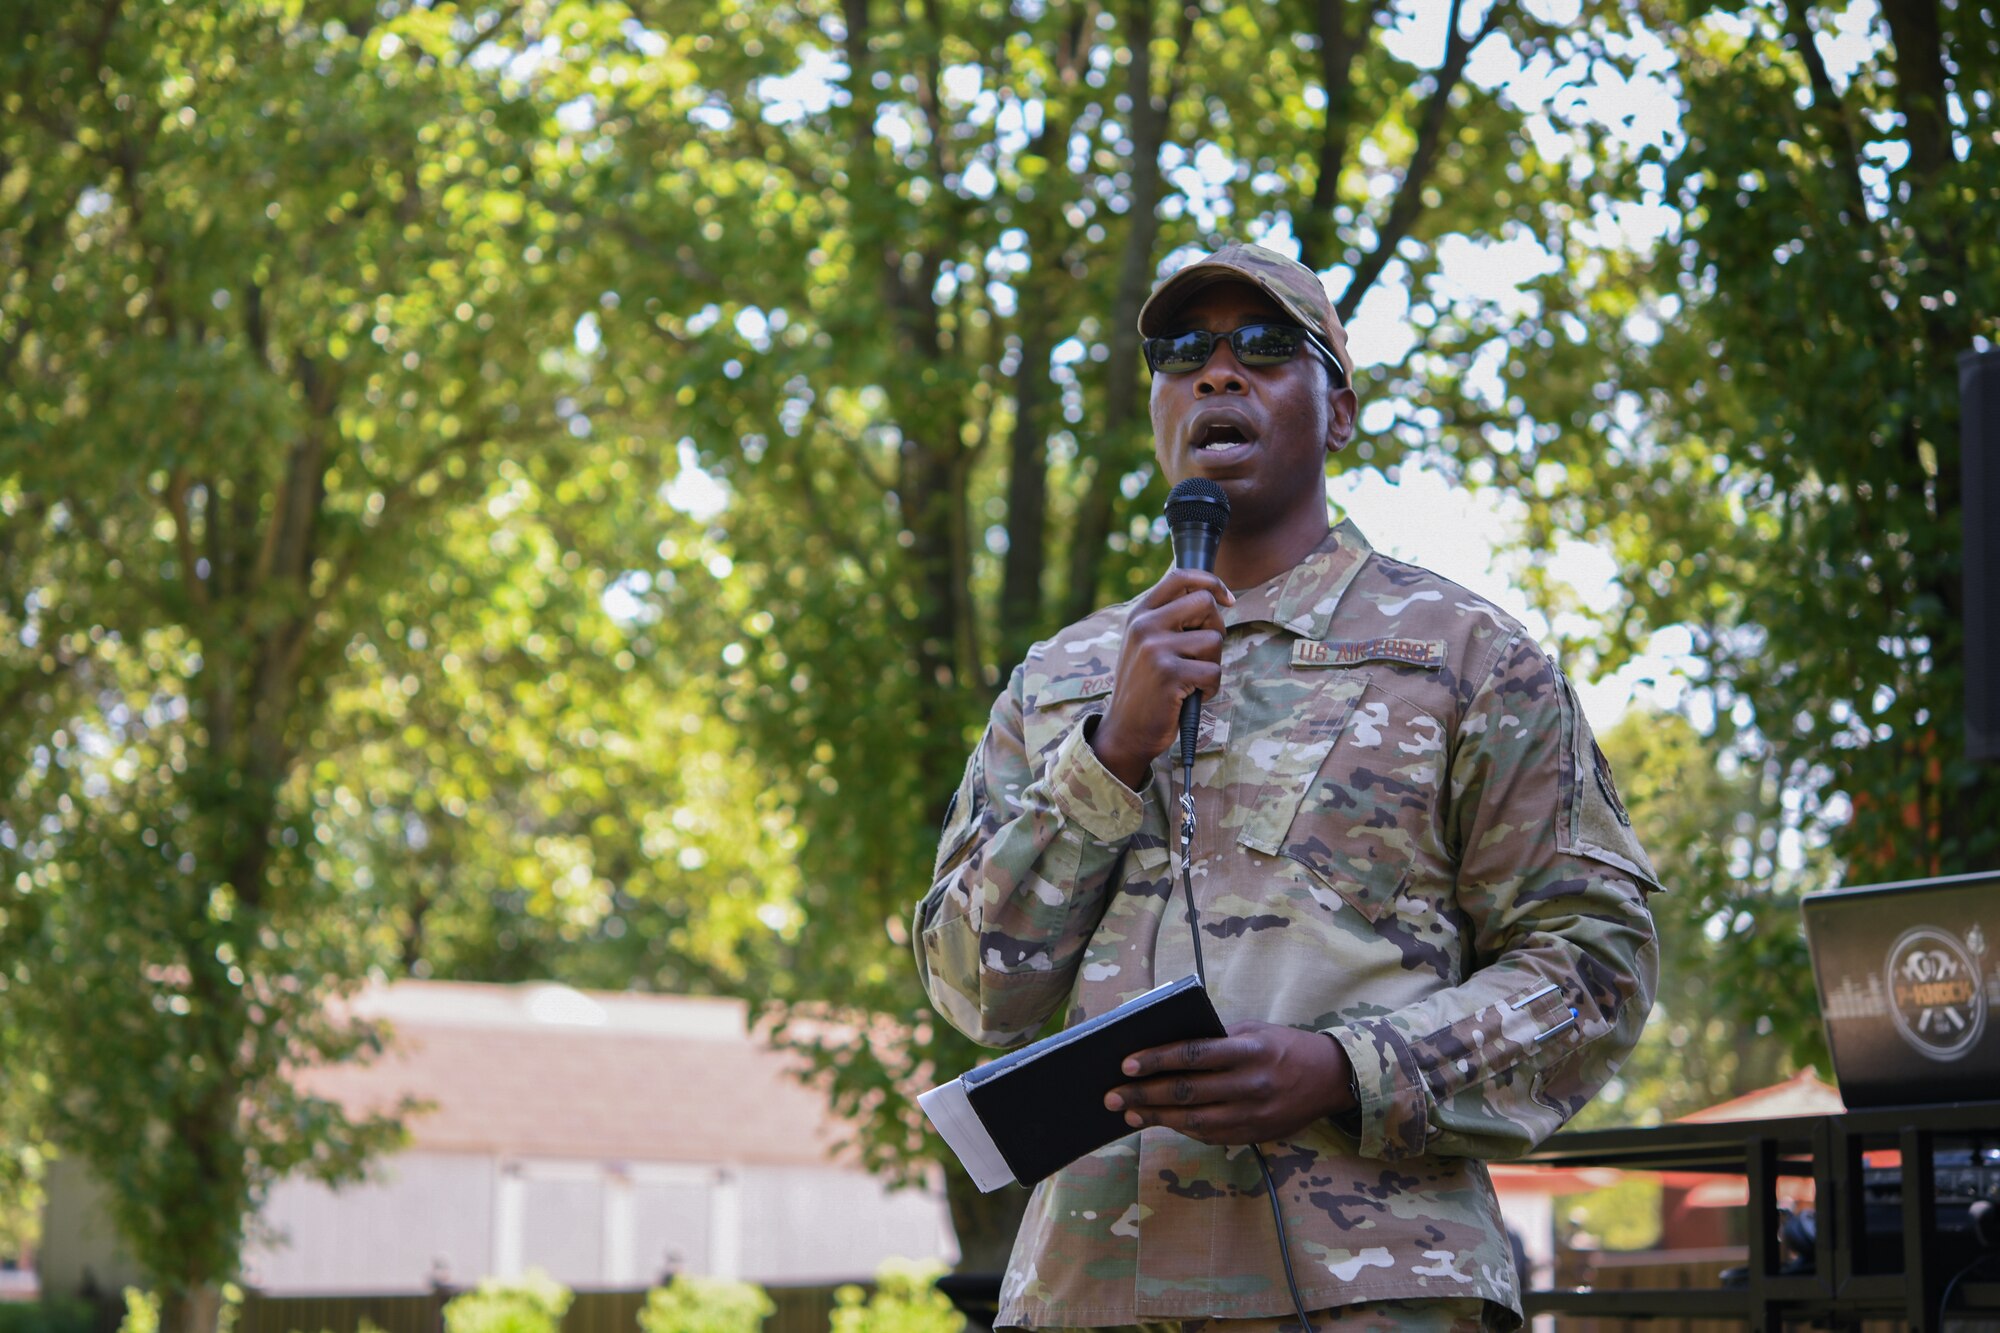 Chief Master Sgt. Ezekiel Ross, 316th Wing command chief, shares a brief message before the start of the Military Market and Enlisted Service Celebration, at the Community Commons on Joint Base Andrews, Md., Aug. 11, 2021.